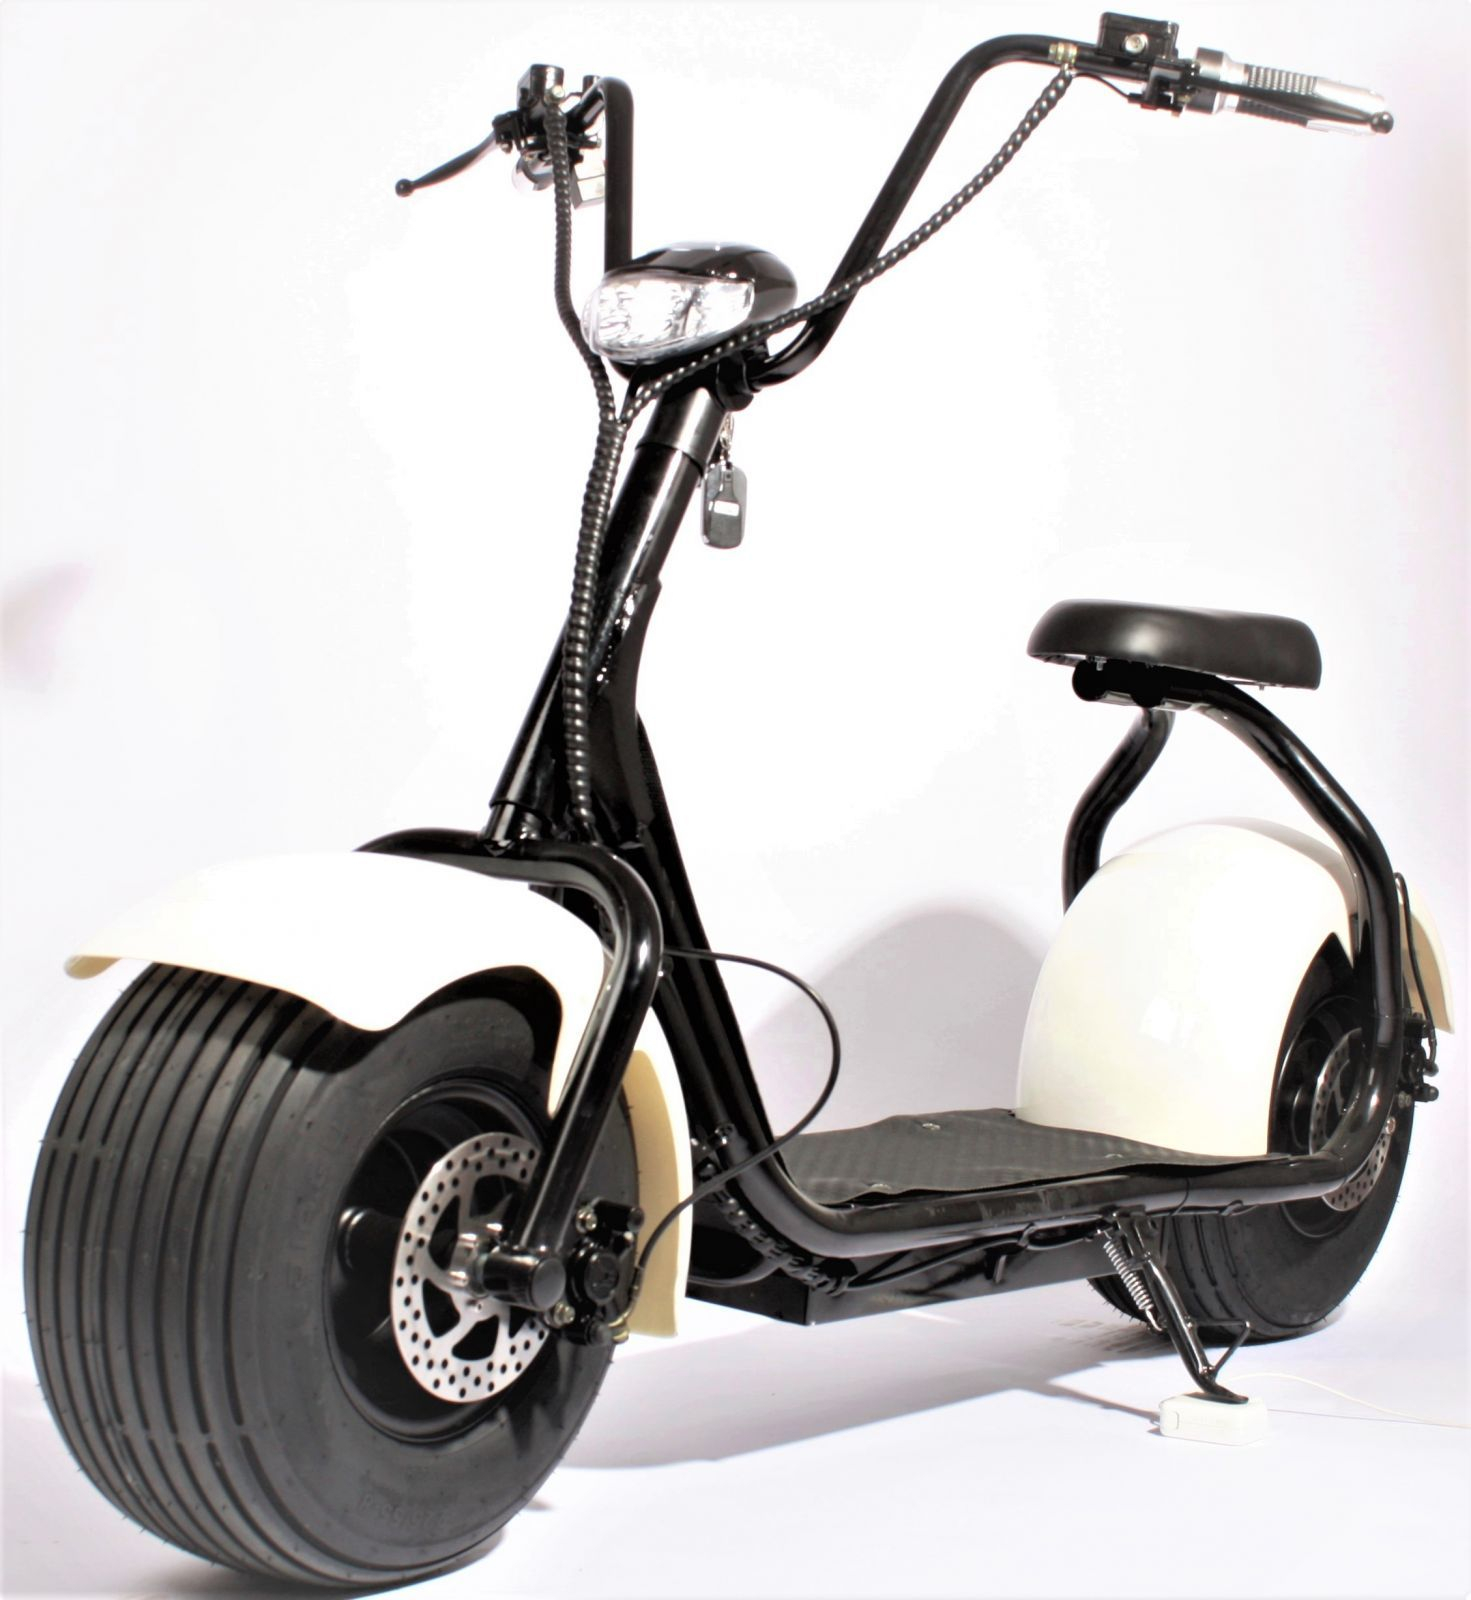 RCskladem ECO HIGHWAY Scooter 1000W ARTR 1:1 A290white white